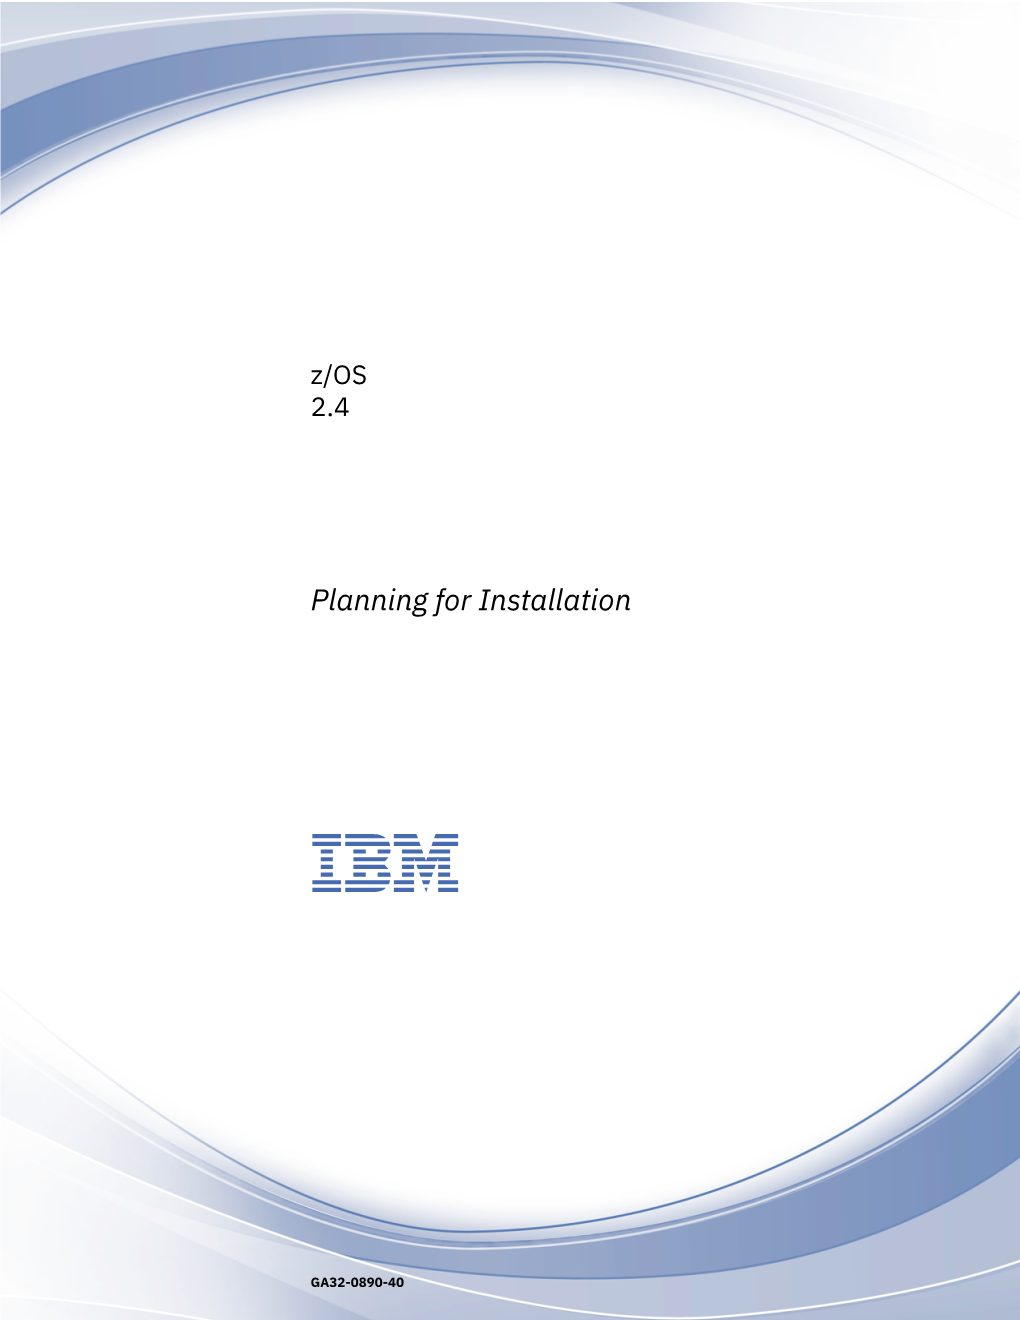 Z/OS Planning for Installation How to Send Your Comments to IBM